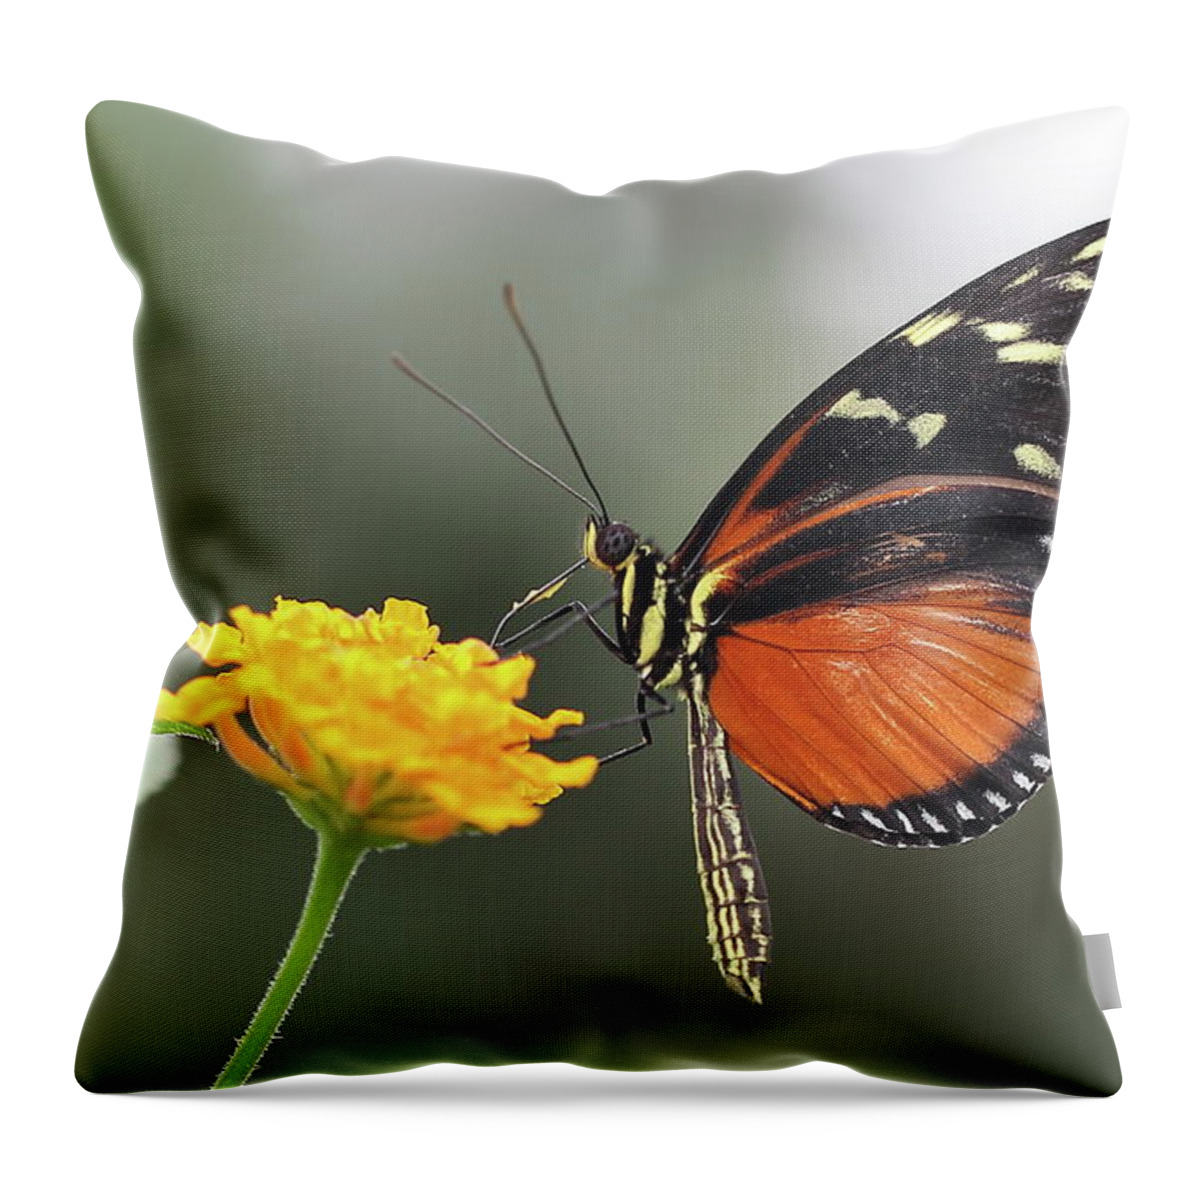 Insect Throw Pillow featuring the photograph Schmetterling Lepidoptera by Copyright By Hellboy2503/jörg David